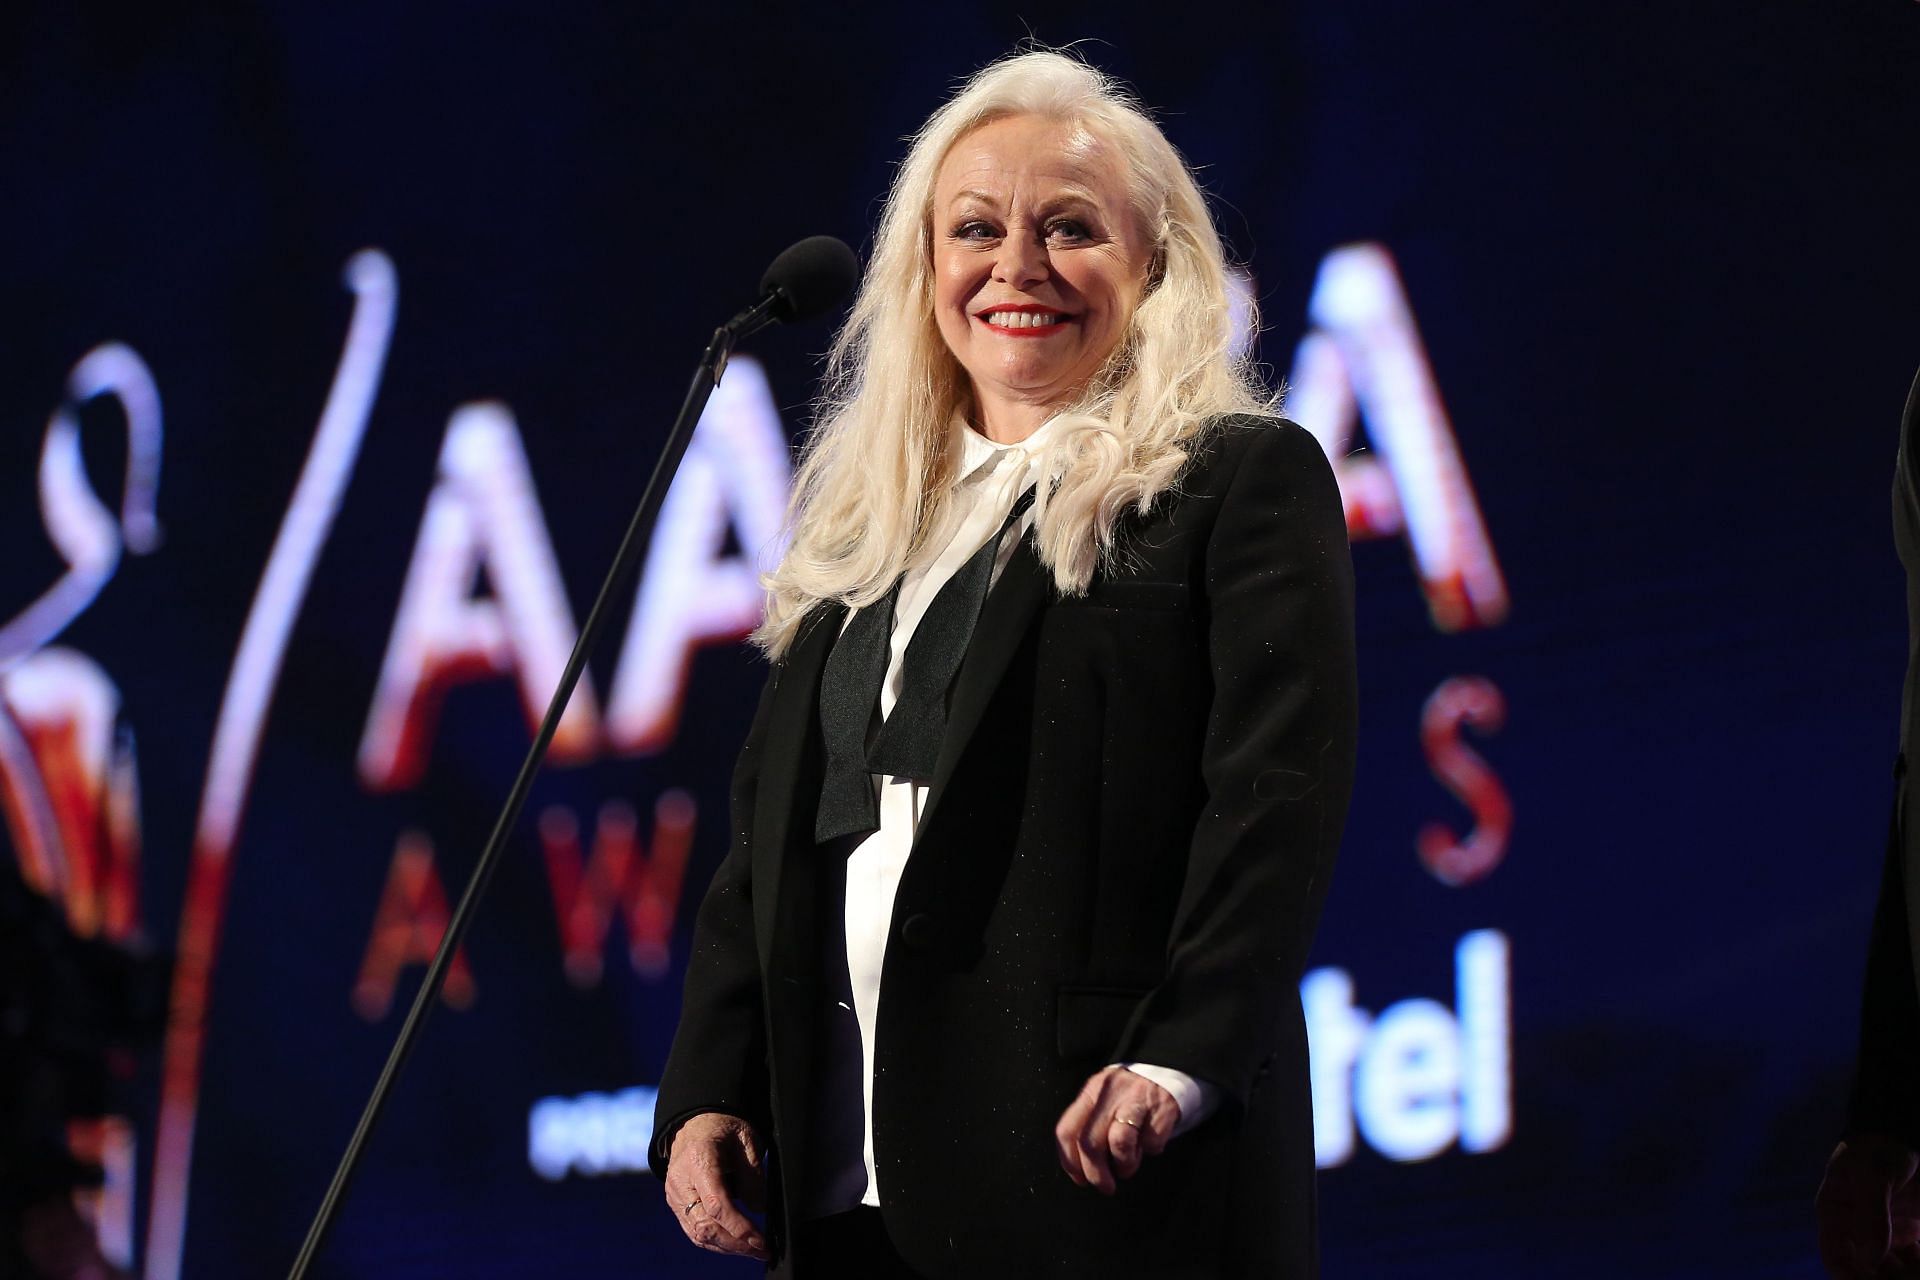 Jacki Weaver is Shelly Sterling in Clipped episode 3 (Image via Brendon Thorne/Getty Images)